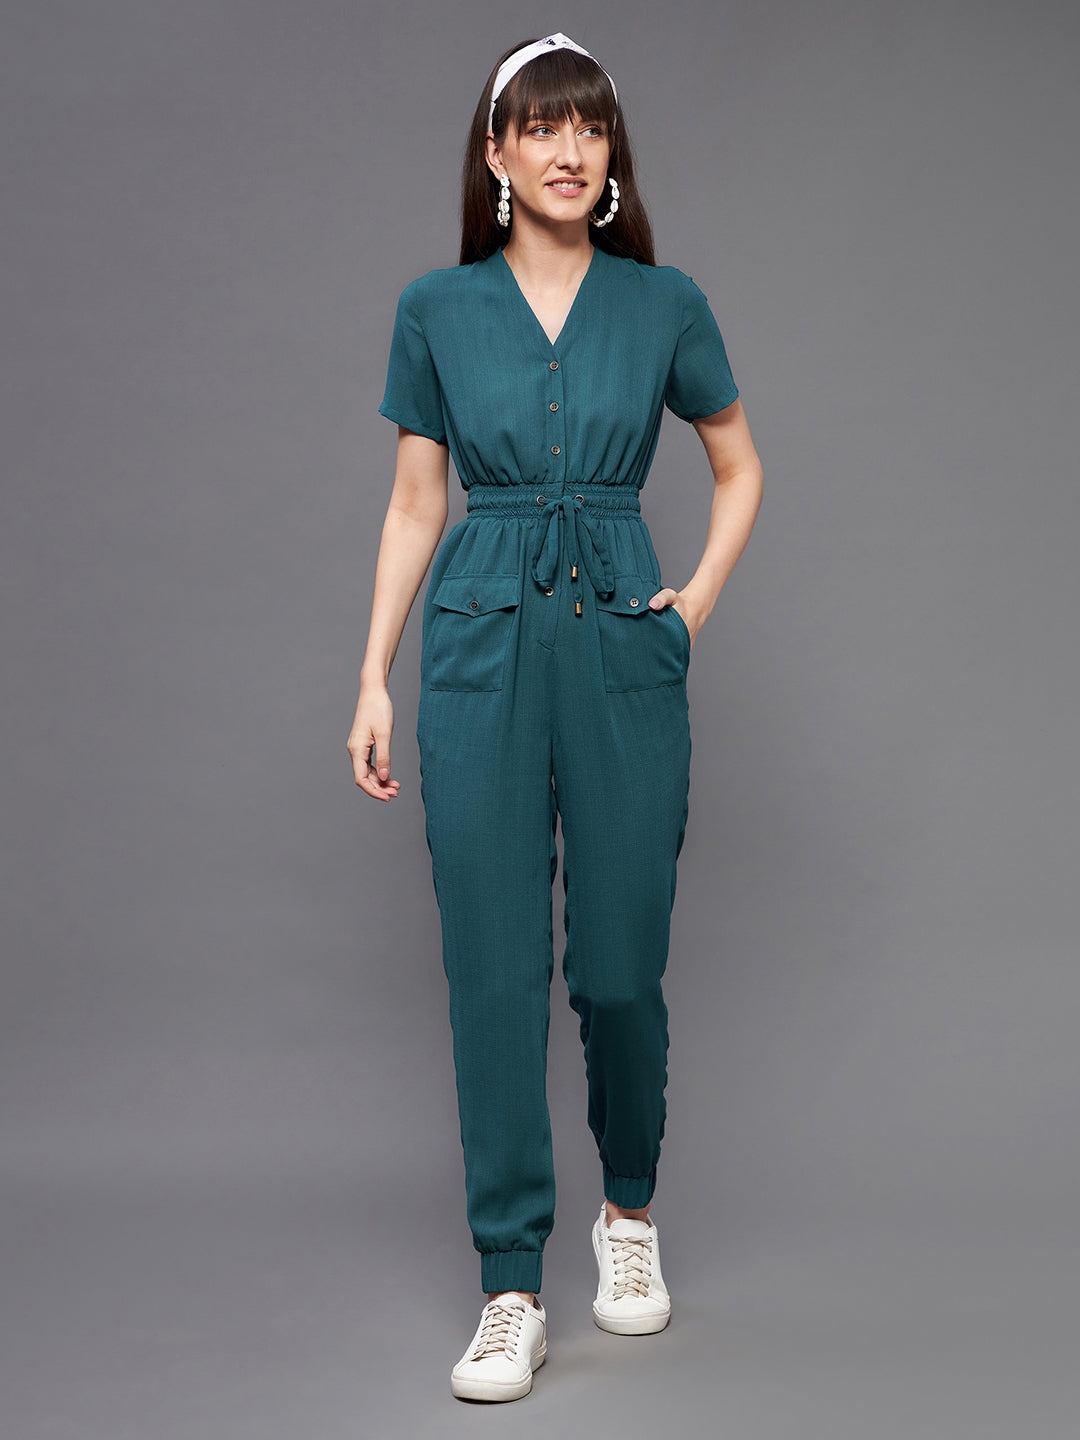 Women's Blue Polyester  Jumpsuits